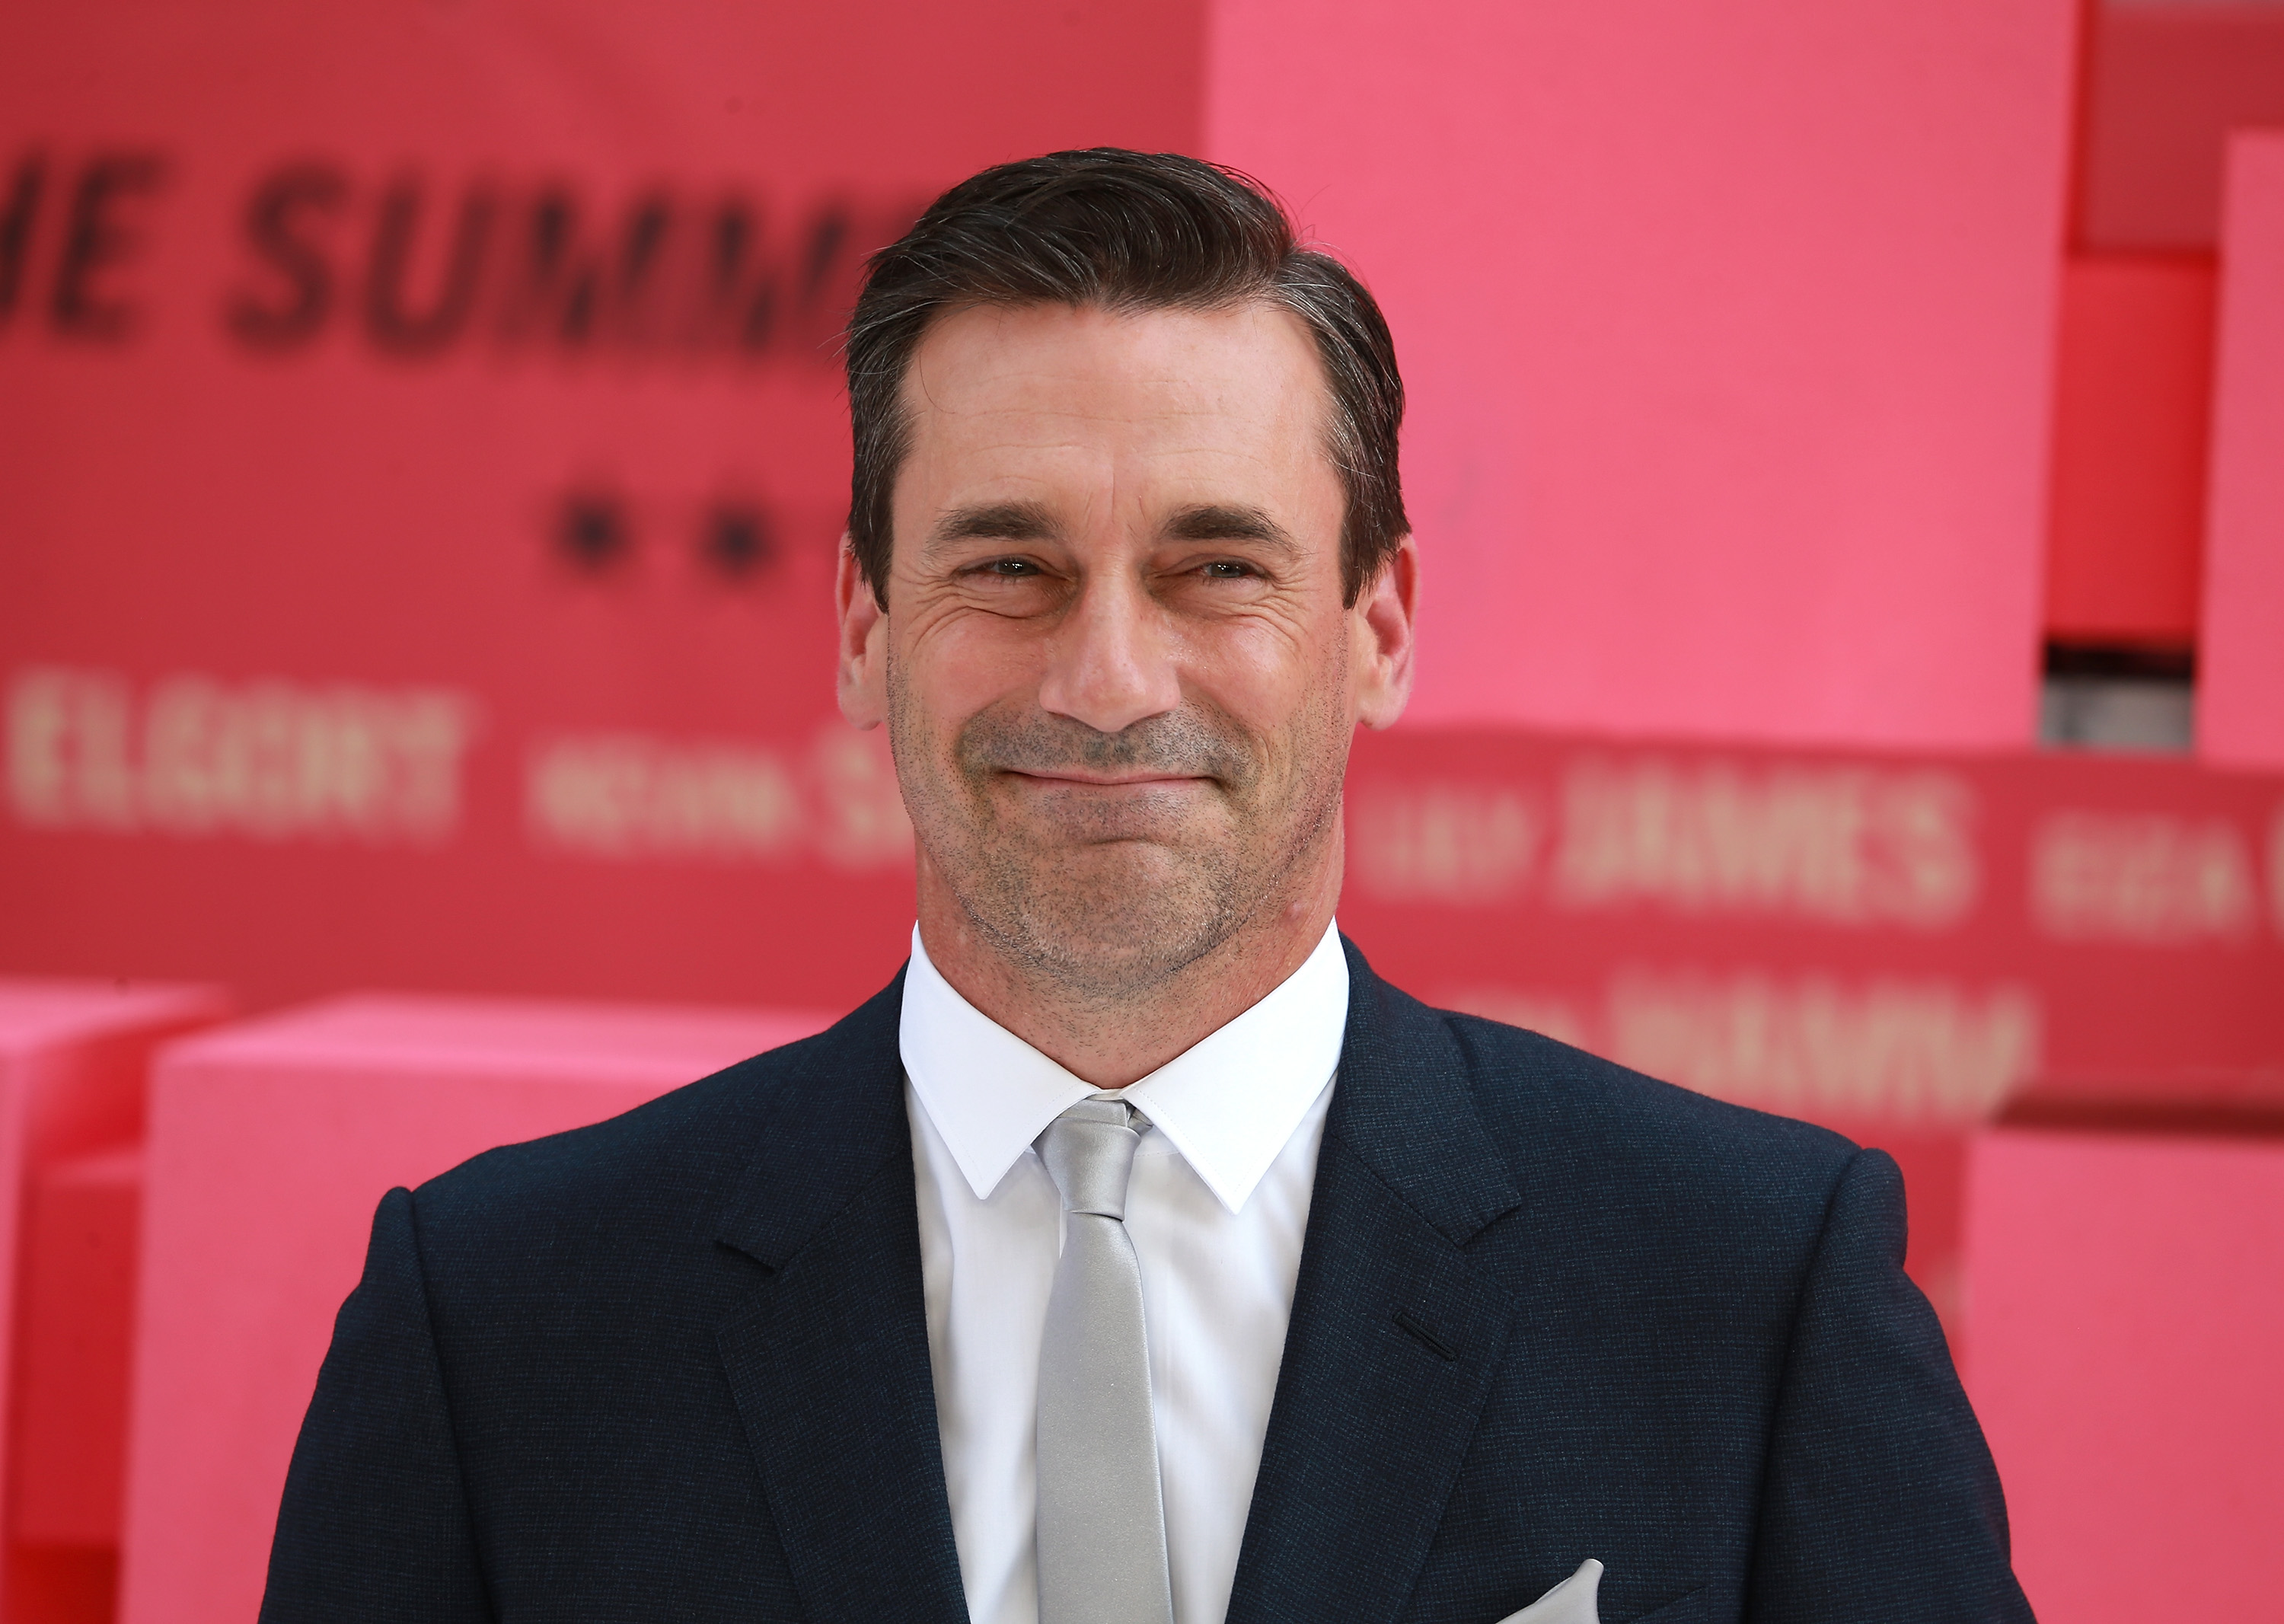 Neil Gaiman shares the first look at Jon Hamm in upcoming Good Omens series